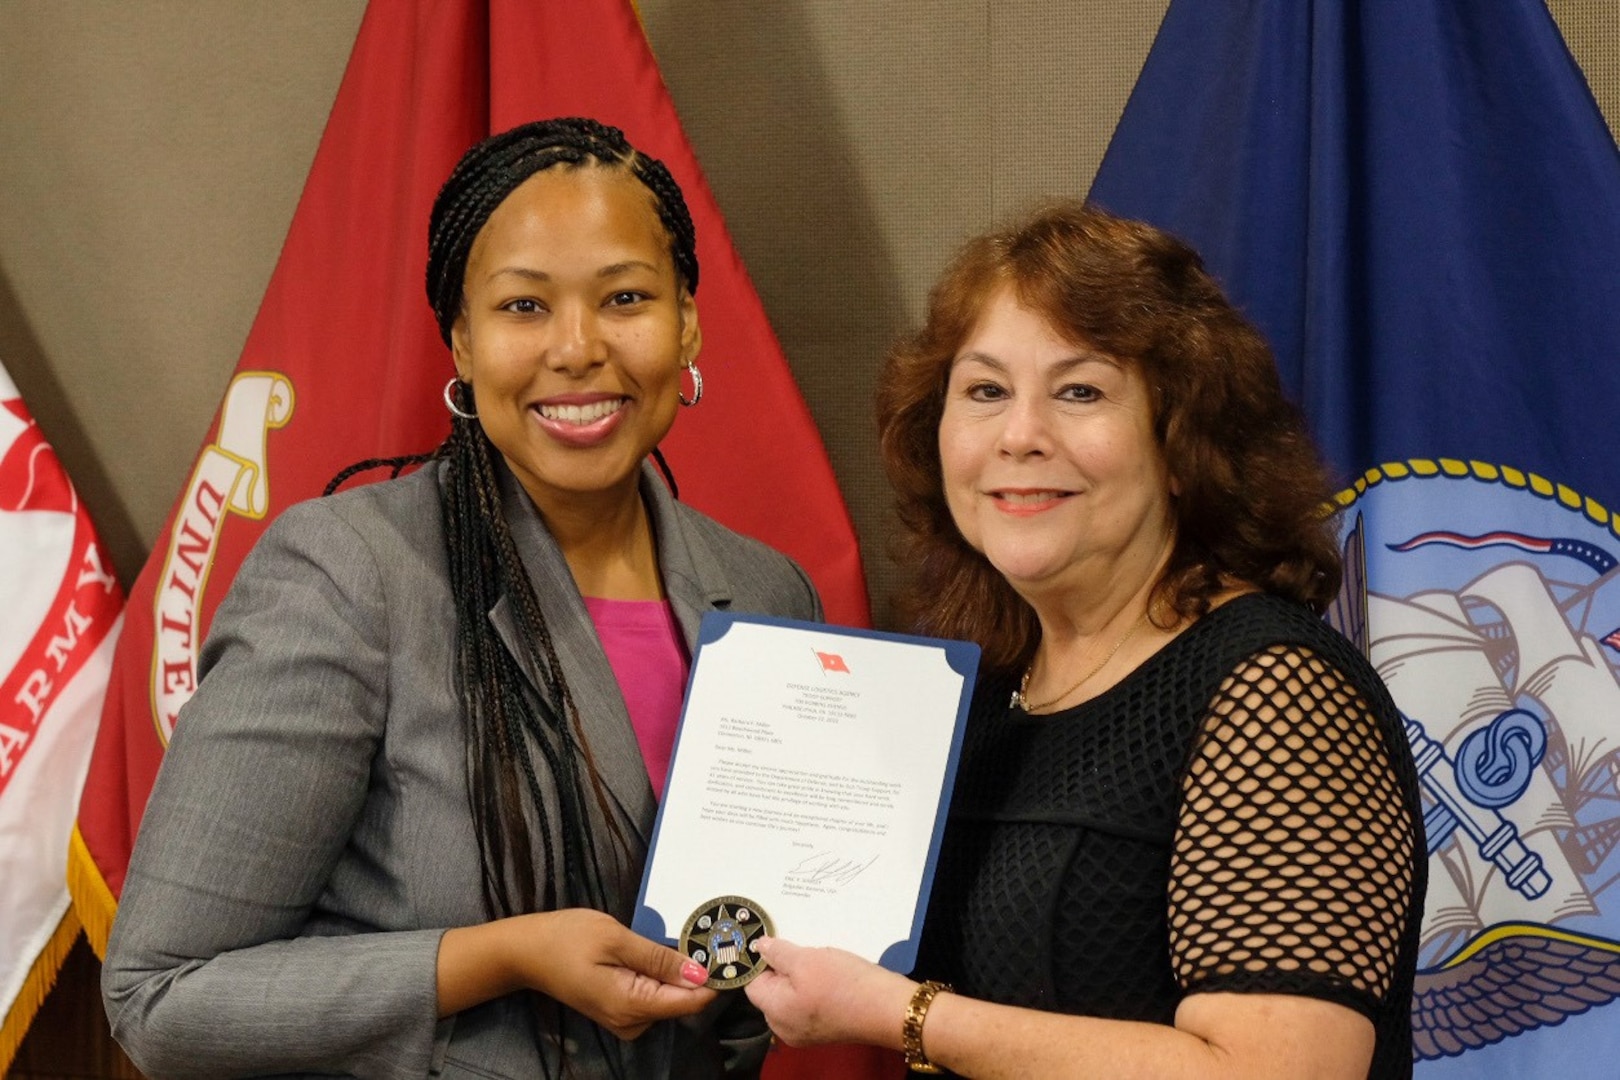 DLA Troop Support Deputy Commander Kishayra Lambert presents a certificate of retirement to Barbara Miller, Logistics Specialist with the Subsistence supply chain, during a ceremony held Oct 24, in Philadelphia. Miller retired from the DLA Troop Support after 41 years of service.